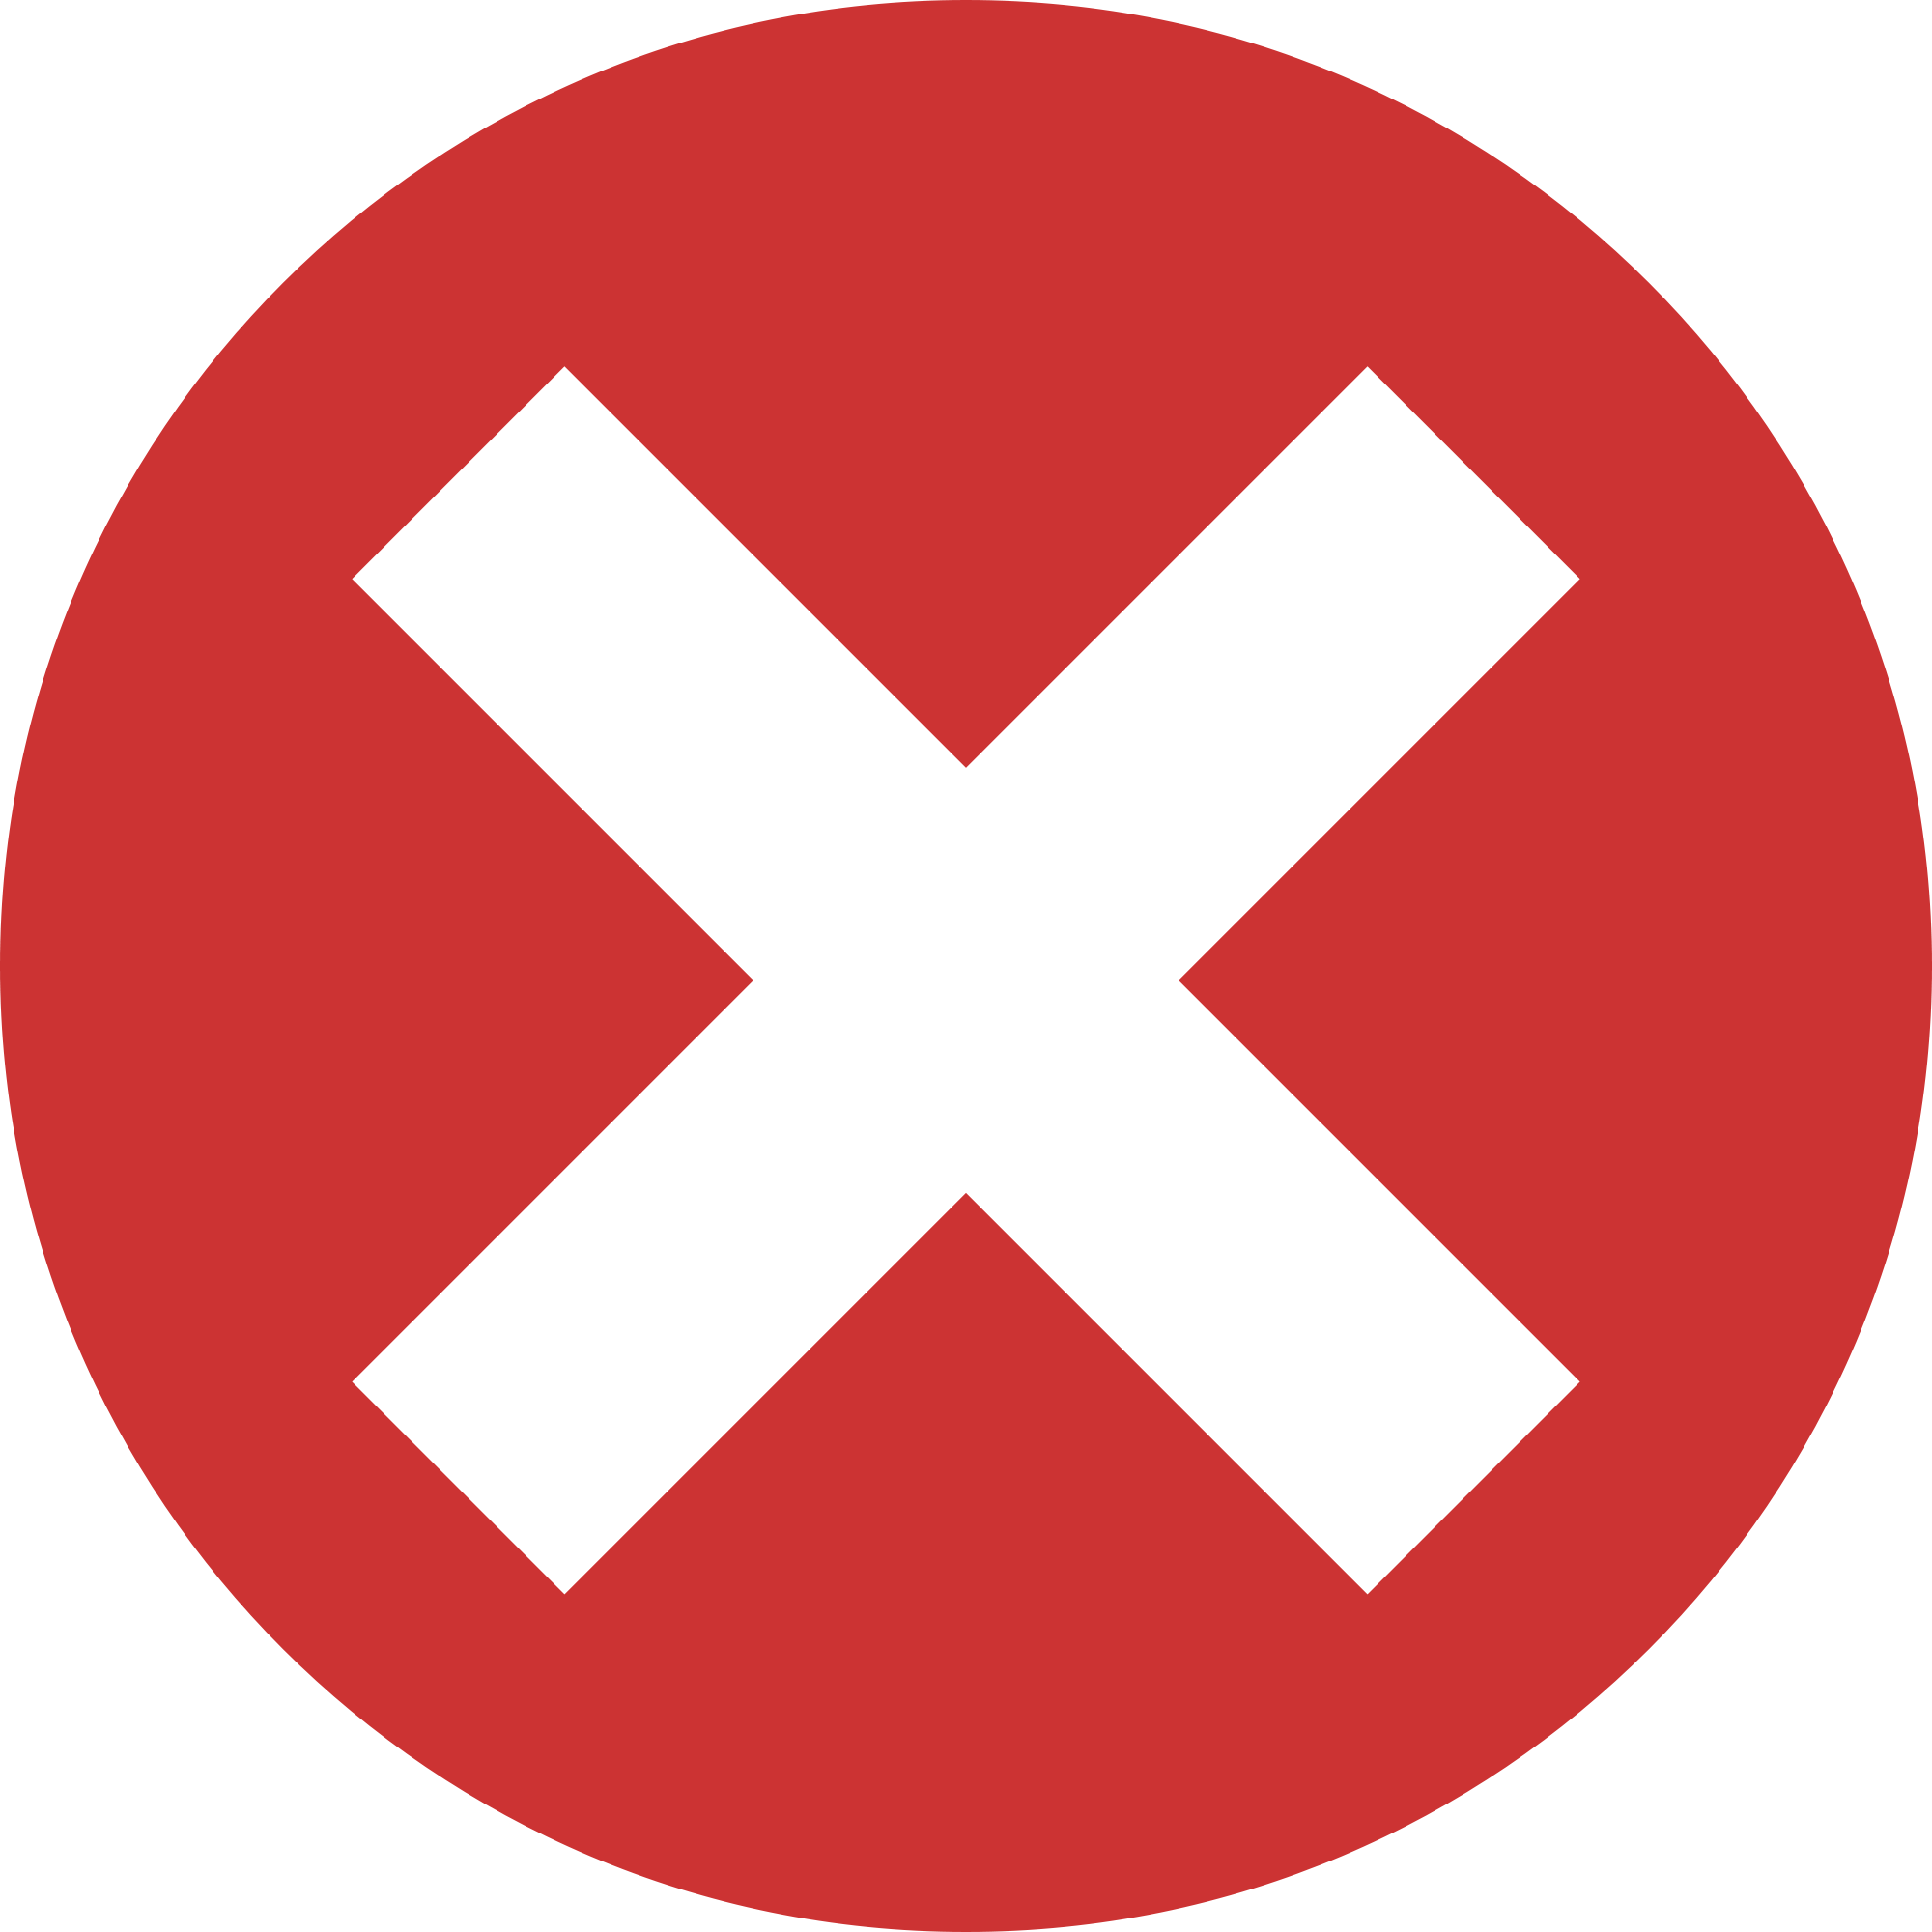 dangerour x red circle, dont enter, close,health and wellness icon png #42447